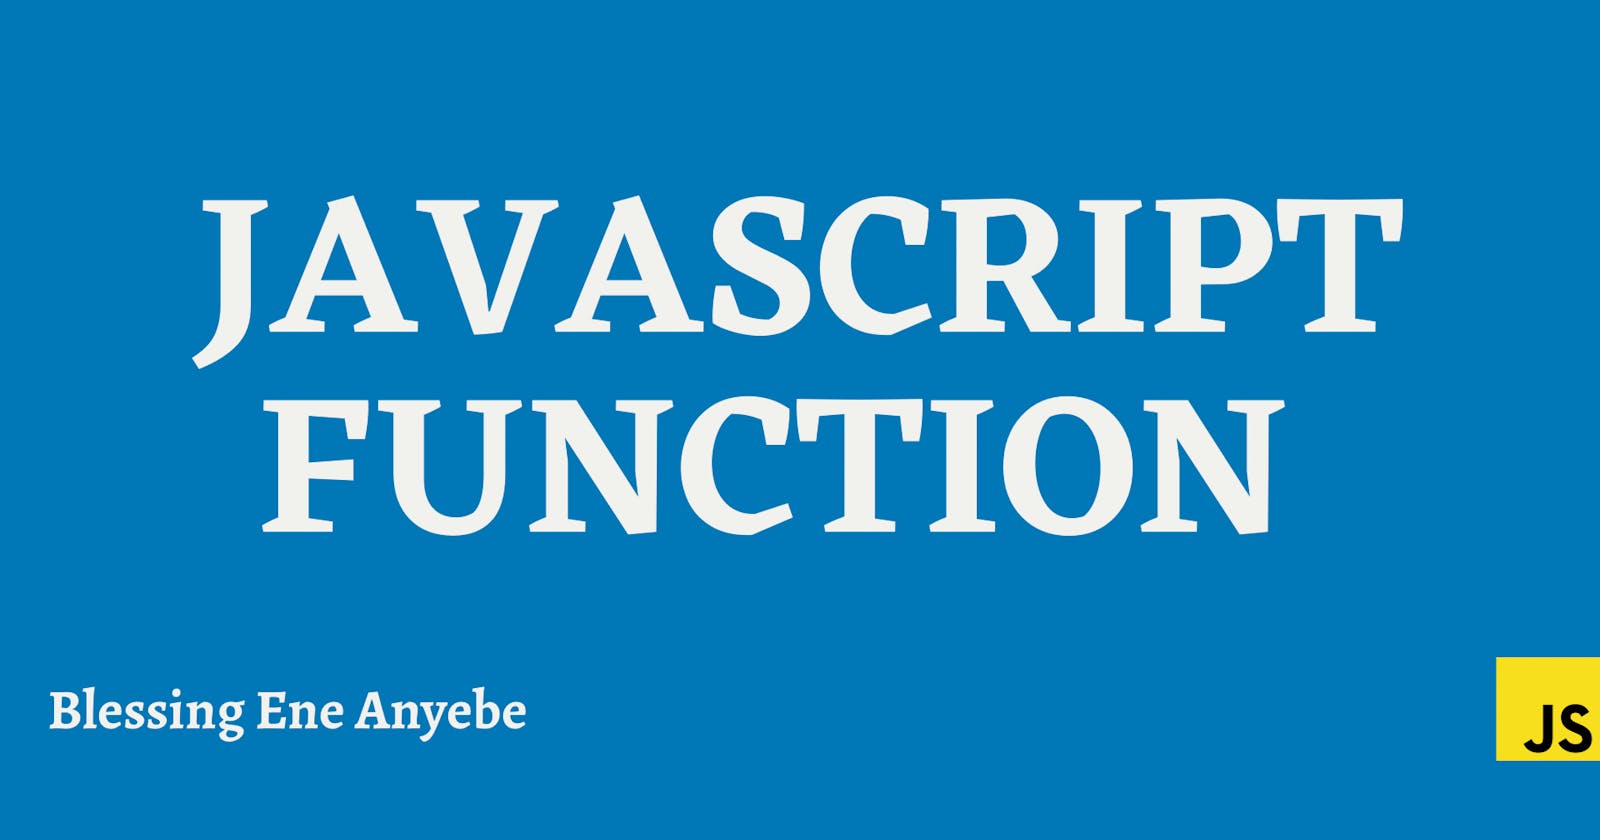 Everything You Need To Know About The JavaScript Function